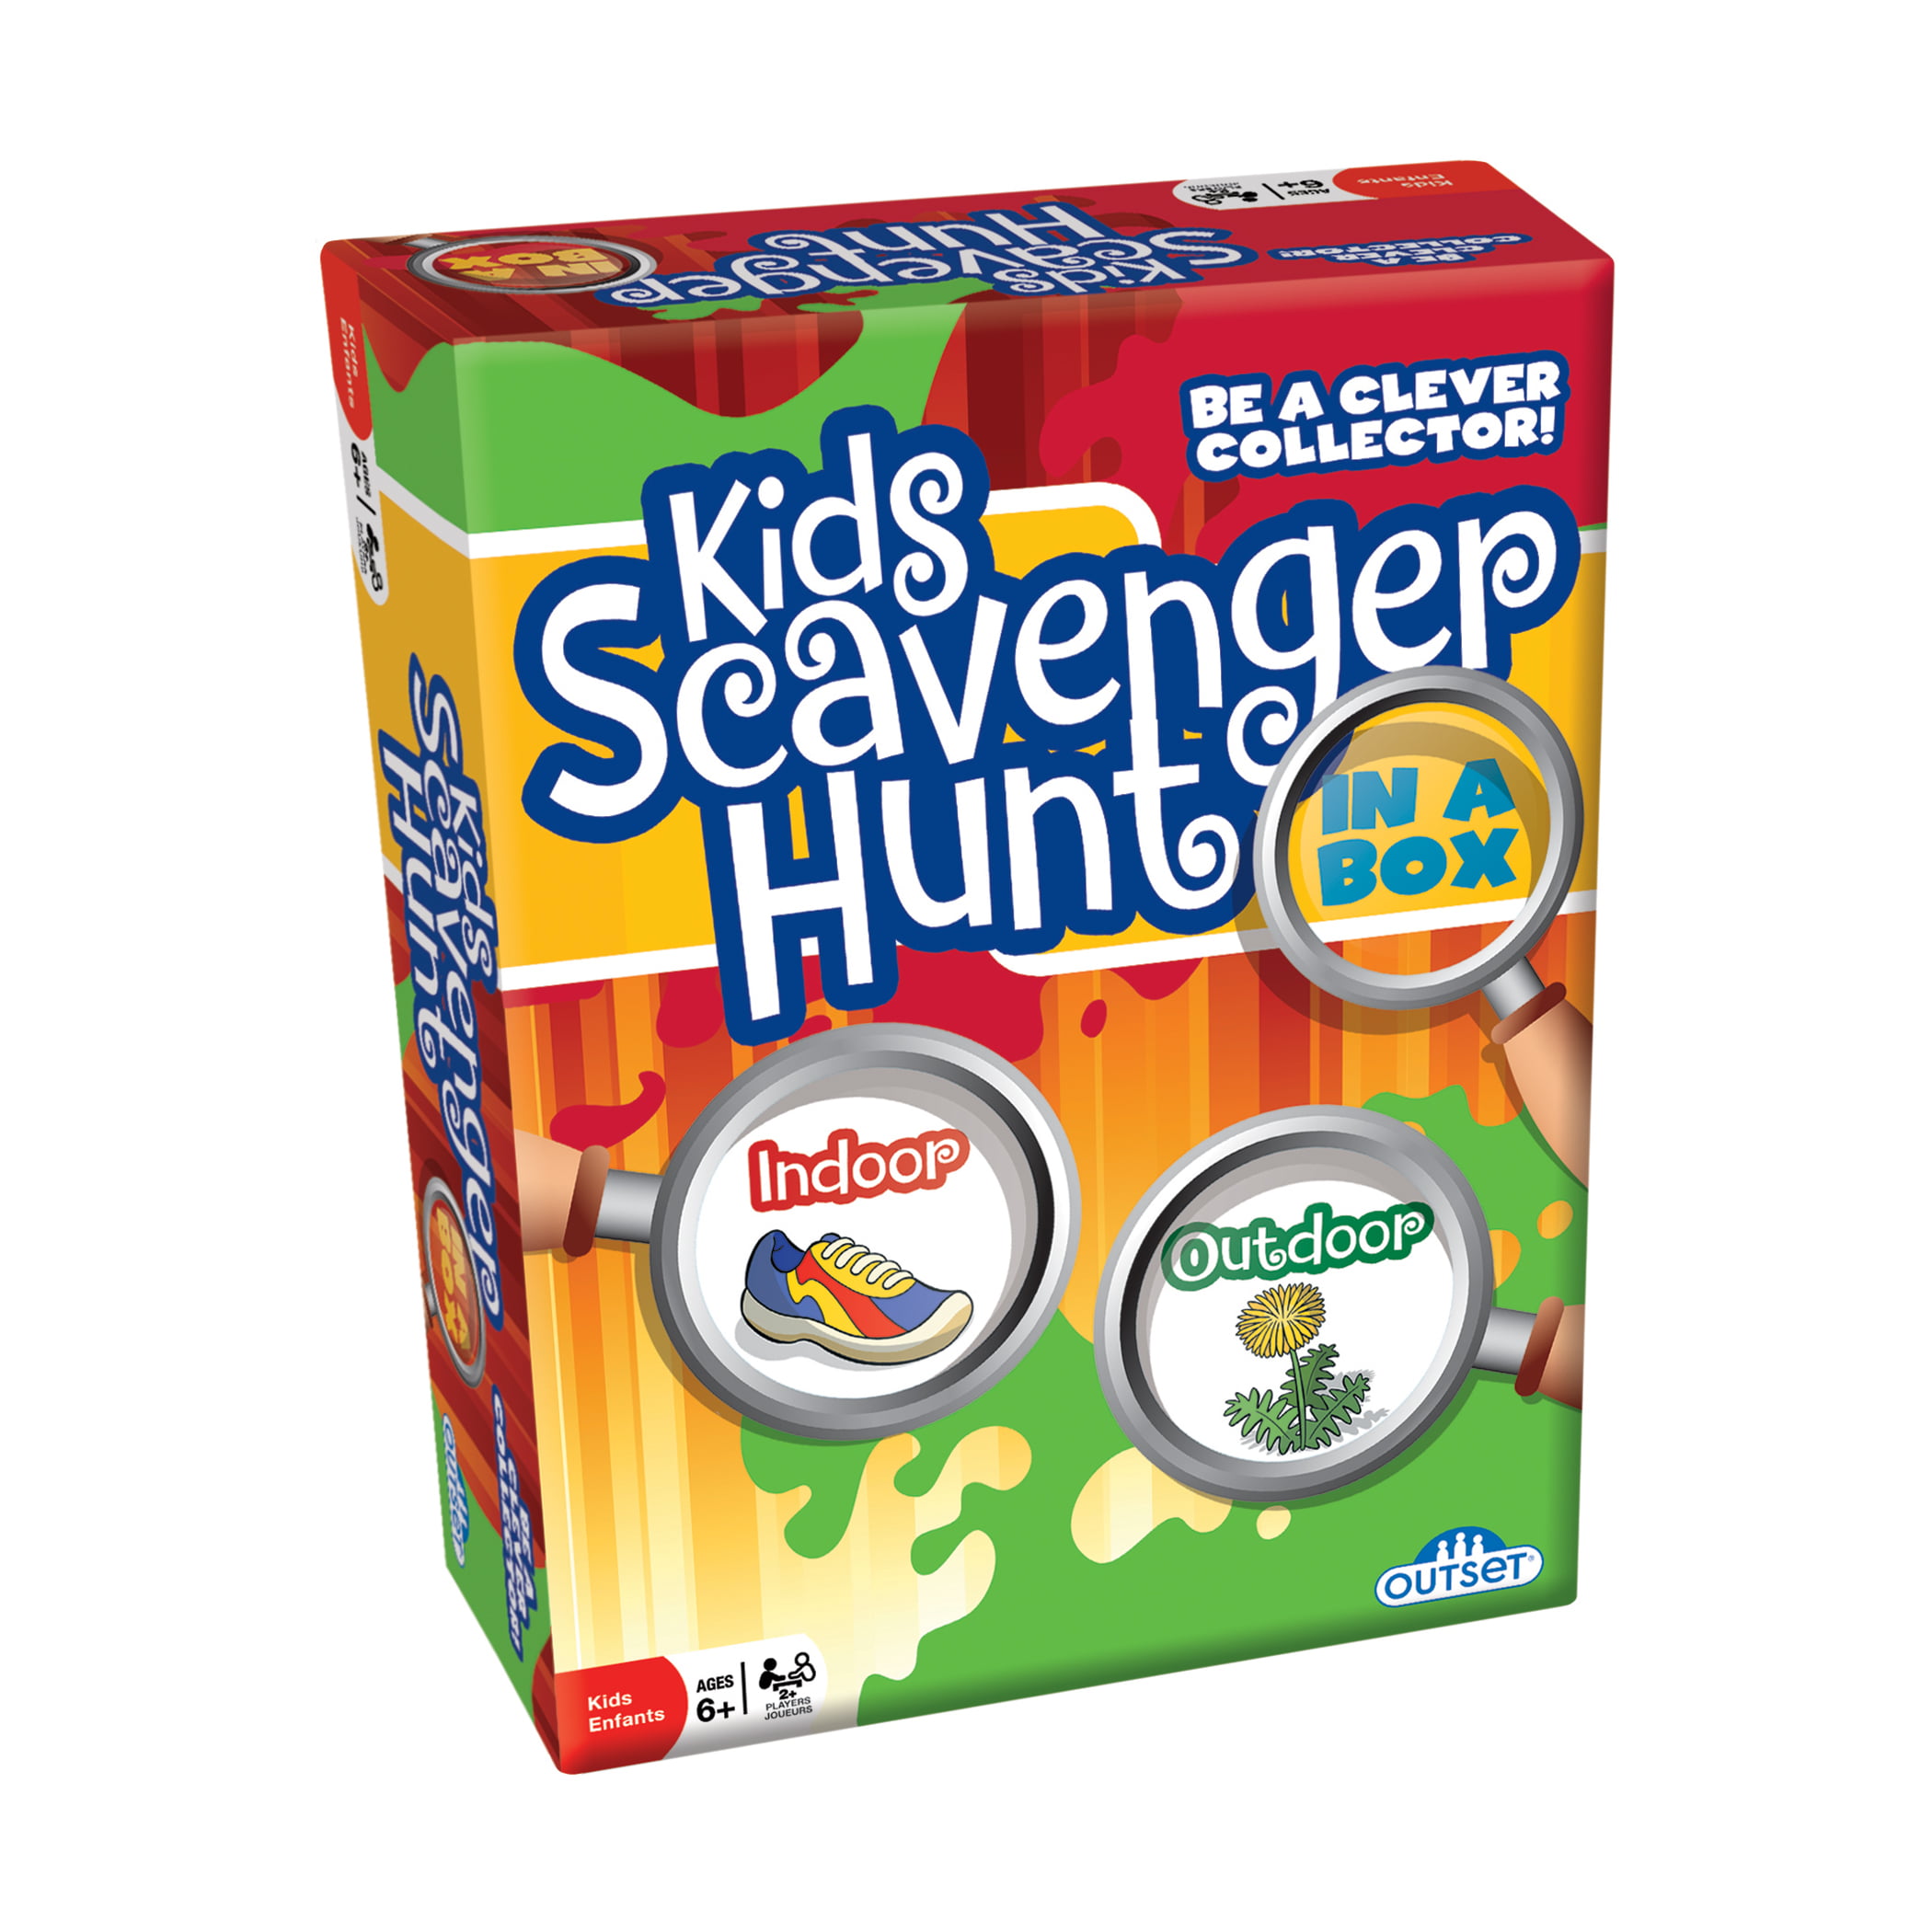 Exclusive Green Yellow Family Scavenger Hunt Game – Contains Over 200 Cards – Fun Party Game for The Whole Family 2 or More Players Ages 6 and up by Outset Media Blue